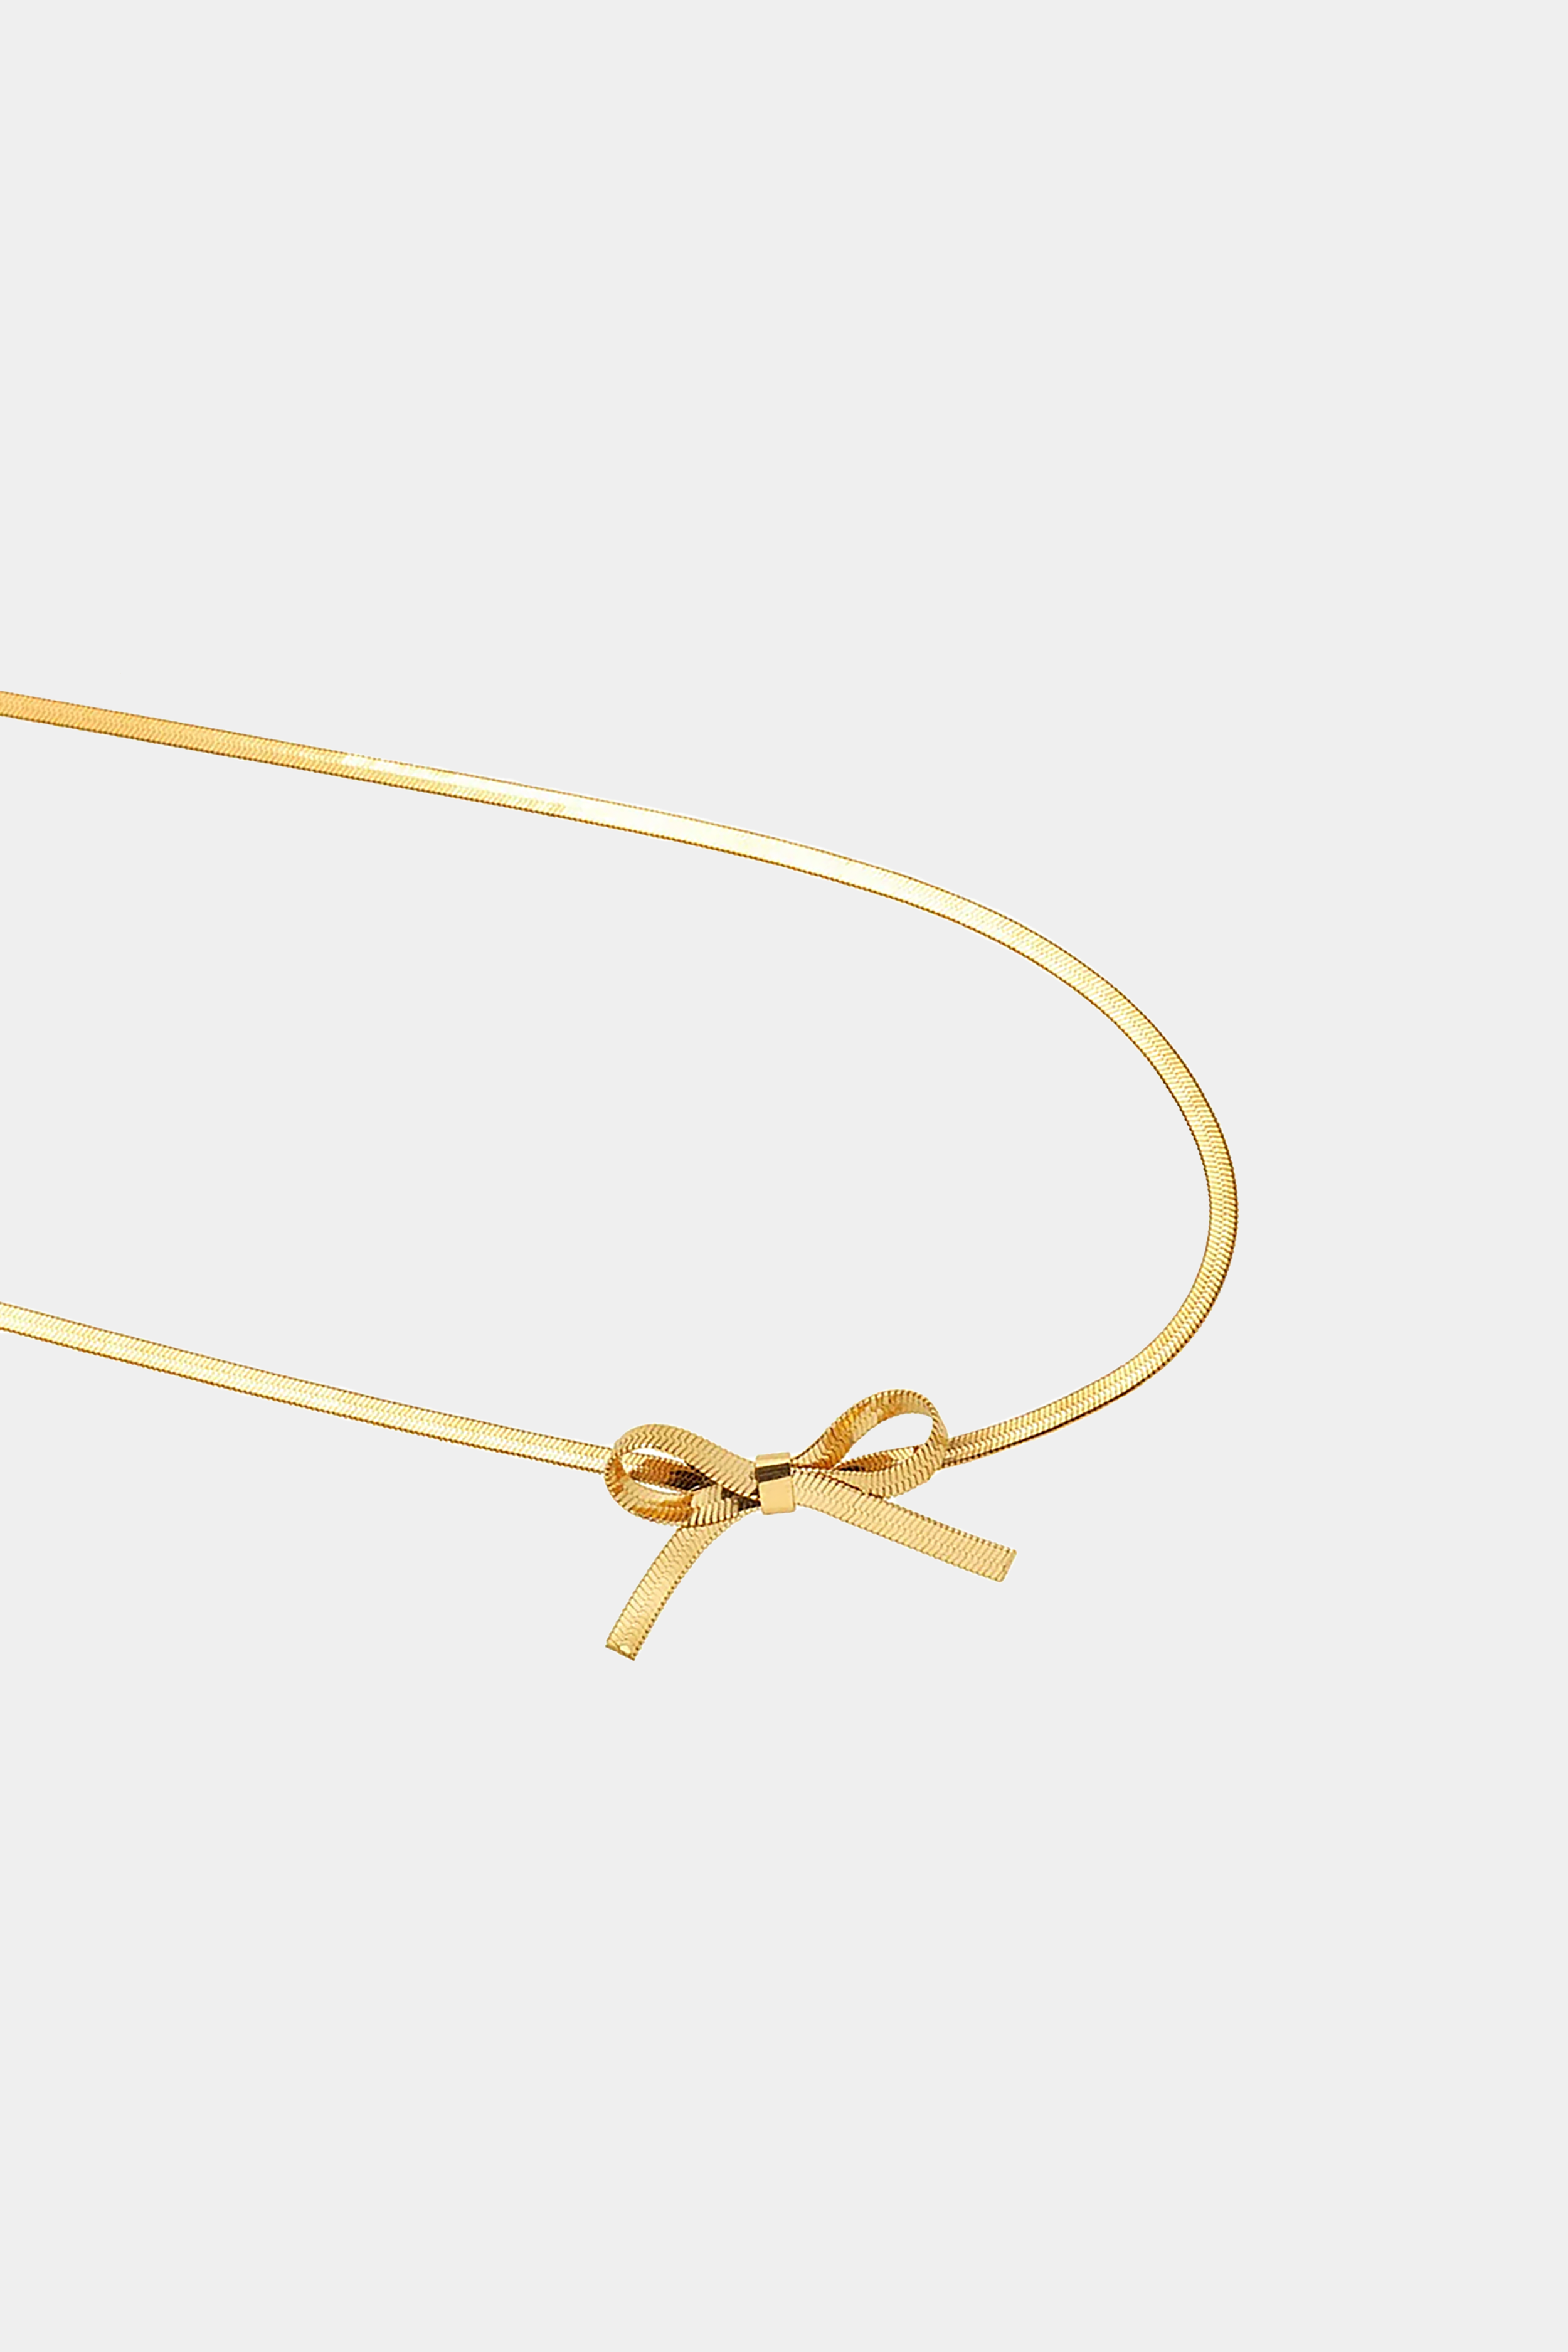 Tiny Bow Choker in Gold